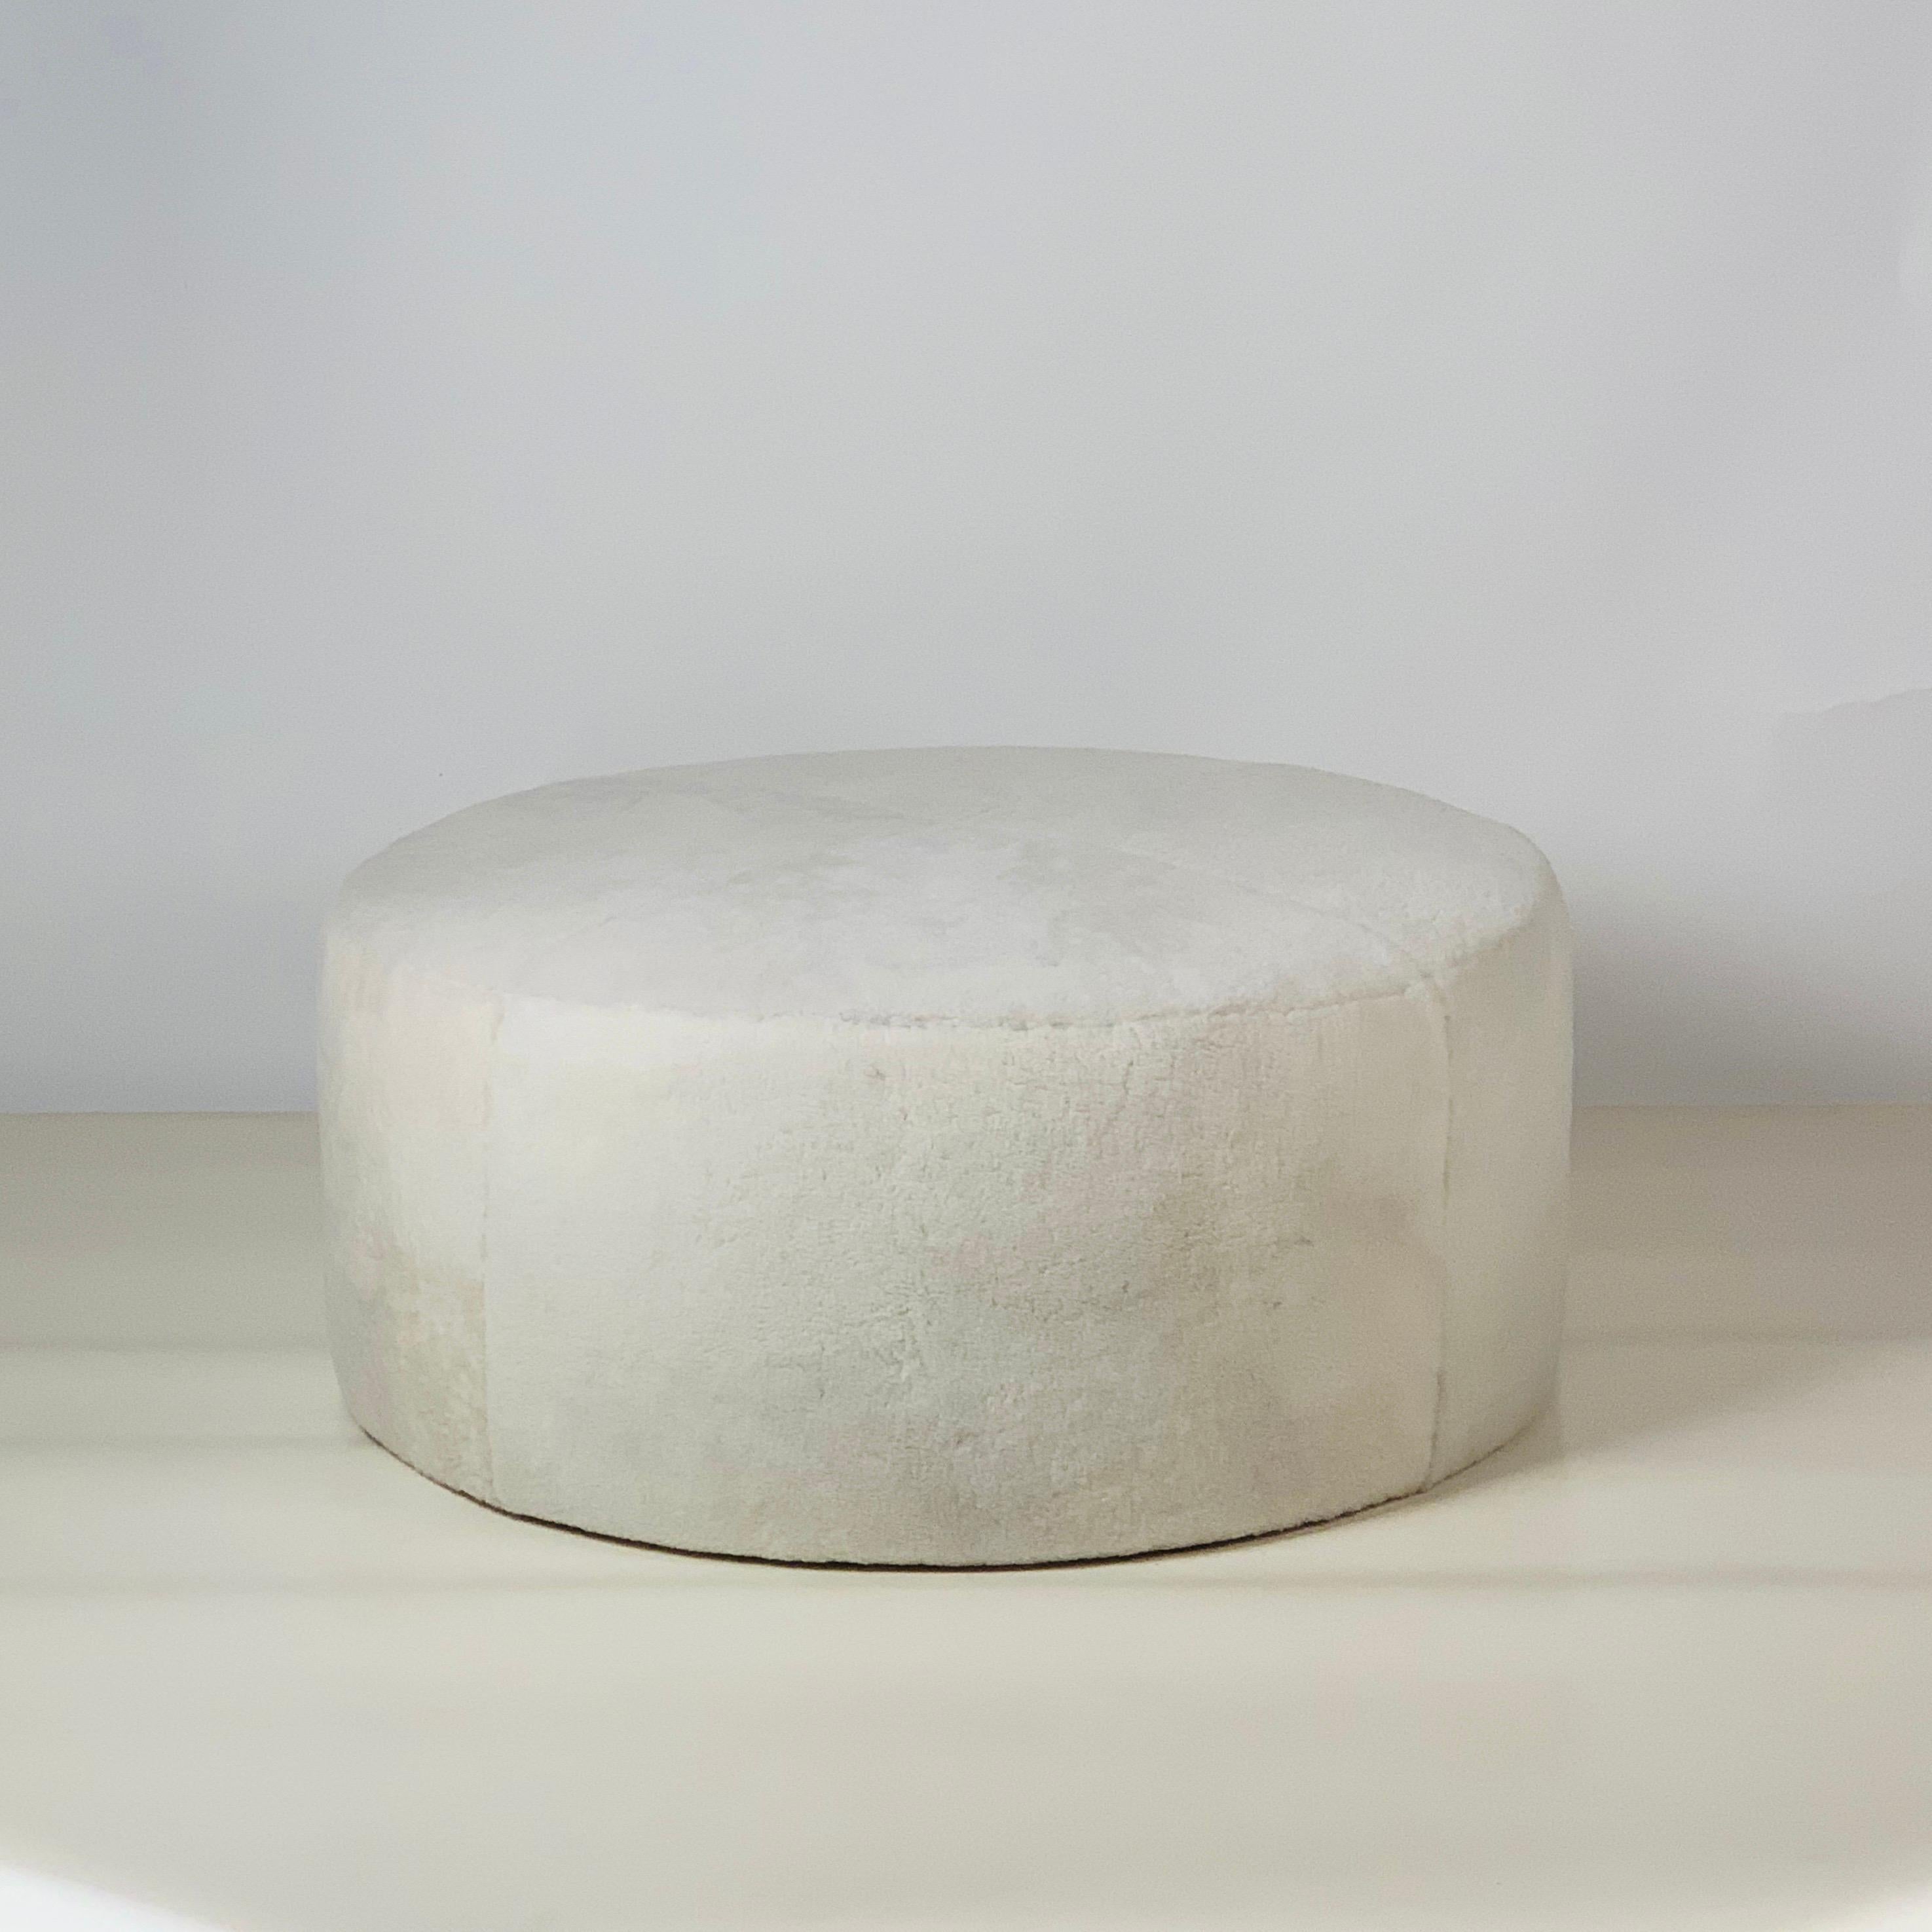 Chic 'Ours Polaire' ottoman by Design Frères.

Beautiful natural shearling round ottoman. Upholstered firm to be used as seating and as a table surface for trays, bags, books, etc.

Inspired by the timeless aesthetic of French modern design,